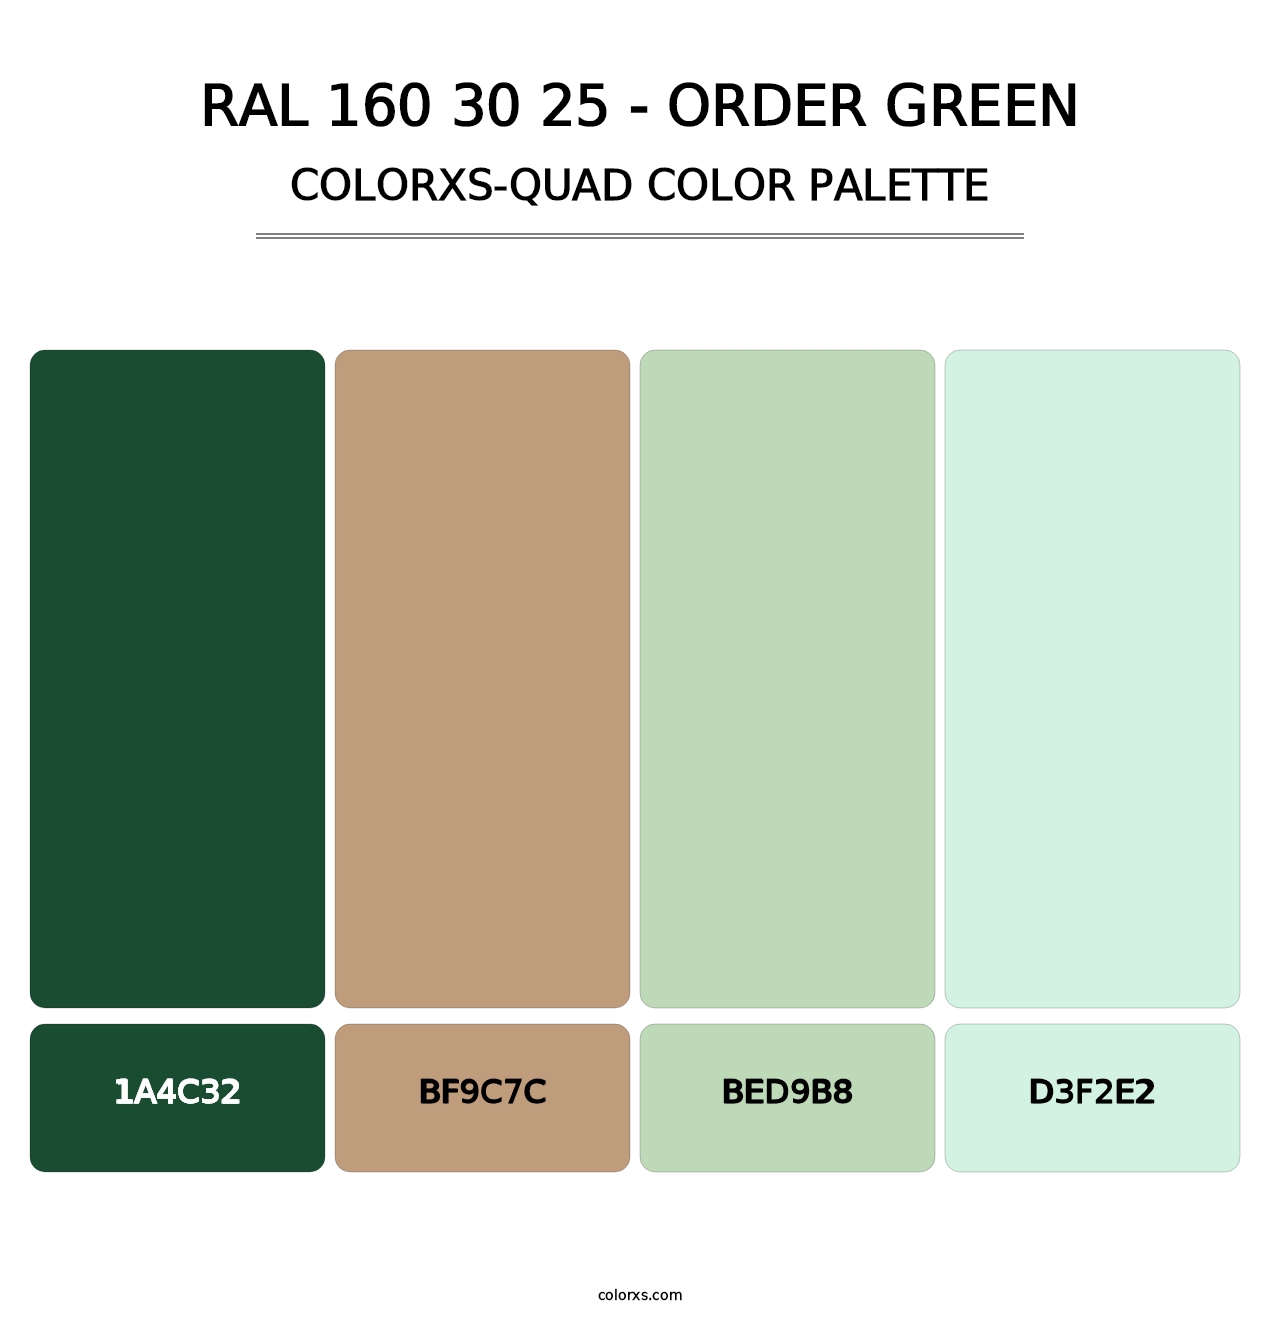 RAL 160 30 25 - Order Green - Colorxs Quad Palette